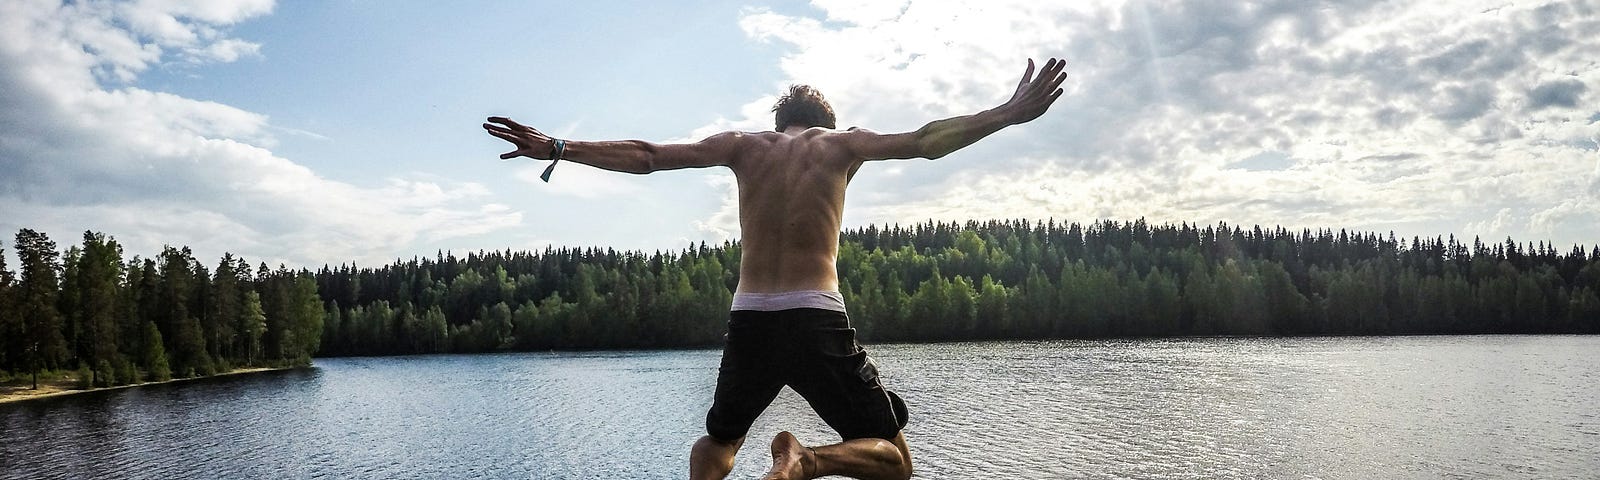 Man with outstretched arms is in mid-jump above the wide expanse of a lake. Blue skies above. The edge of a forest in the distance.